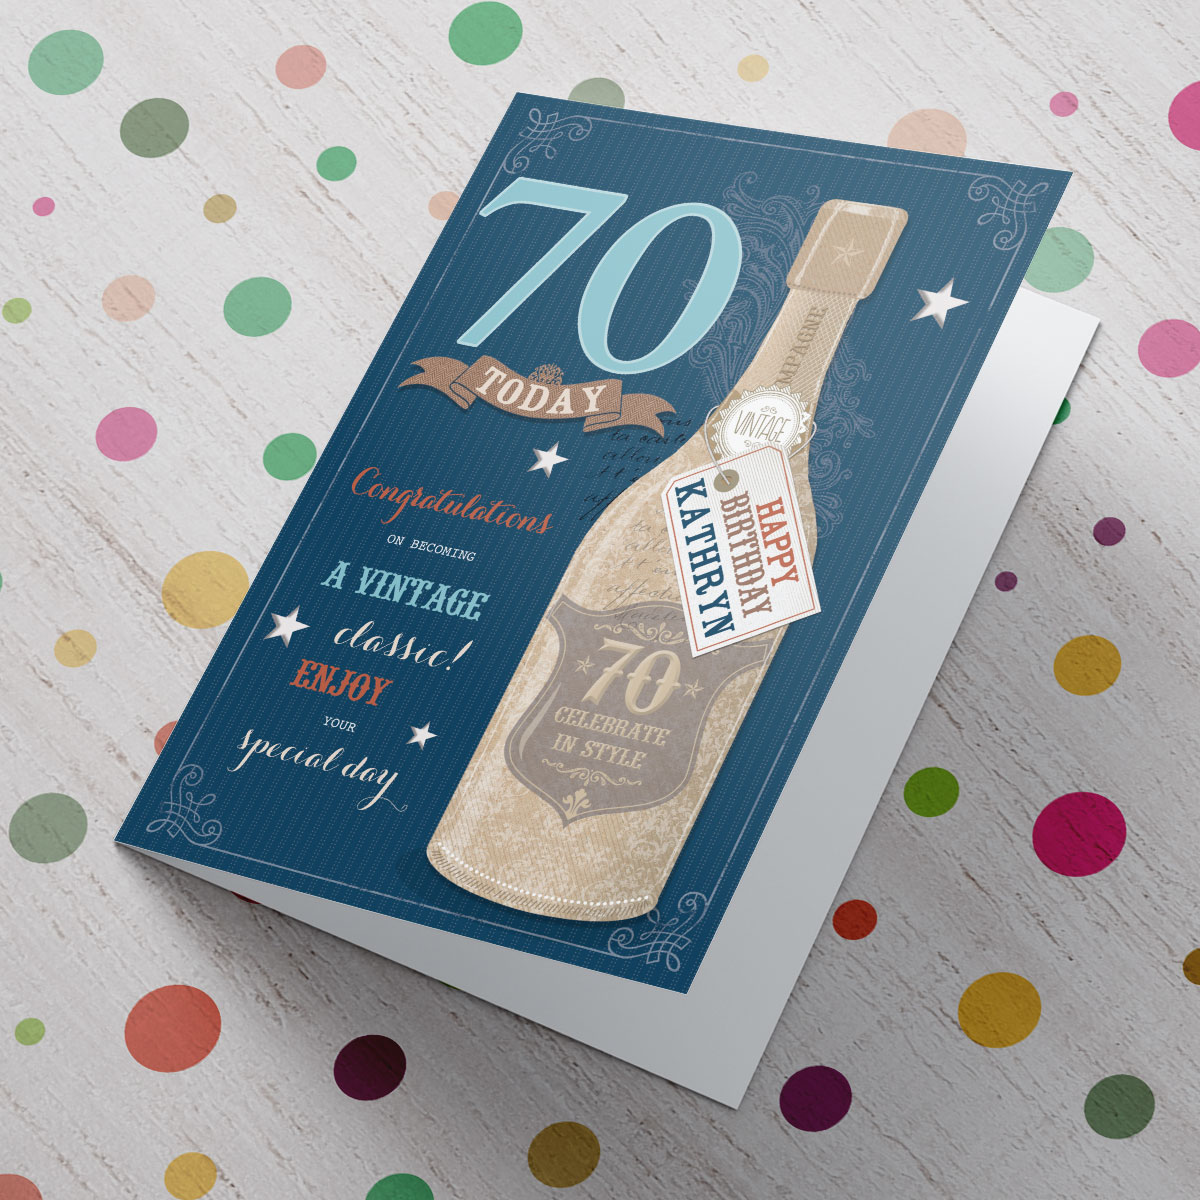 Personalised Card - 70 Today - A Vintage Classic